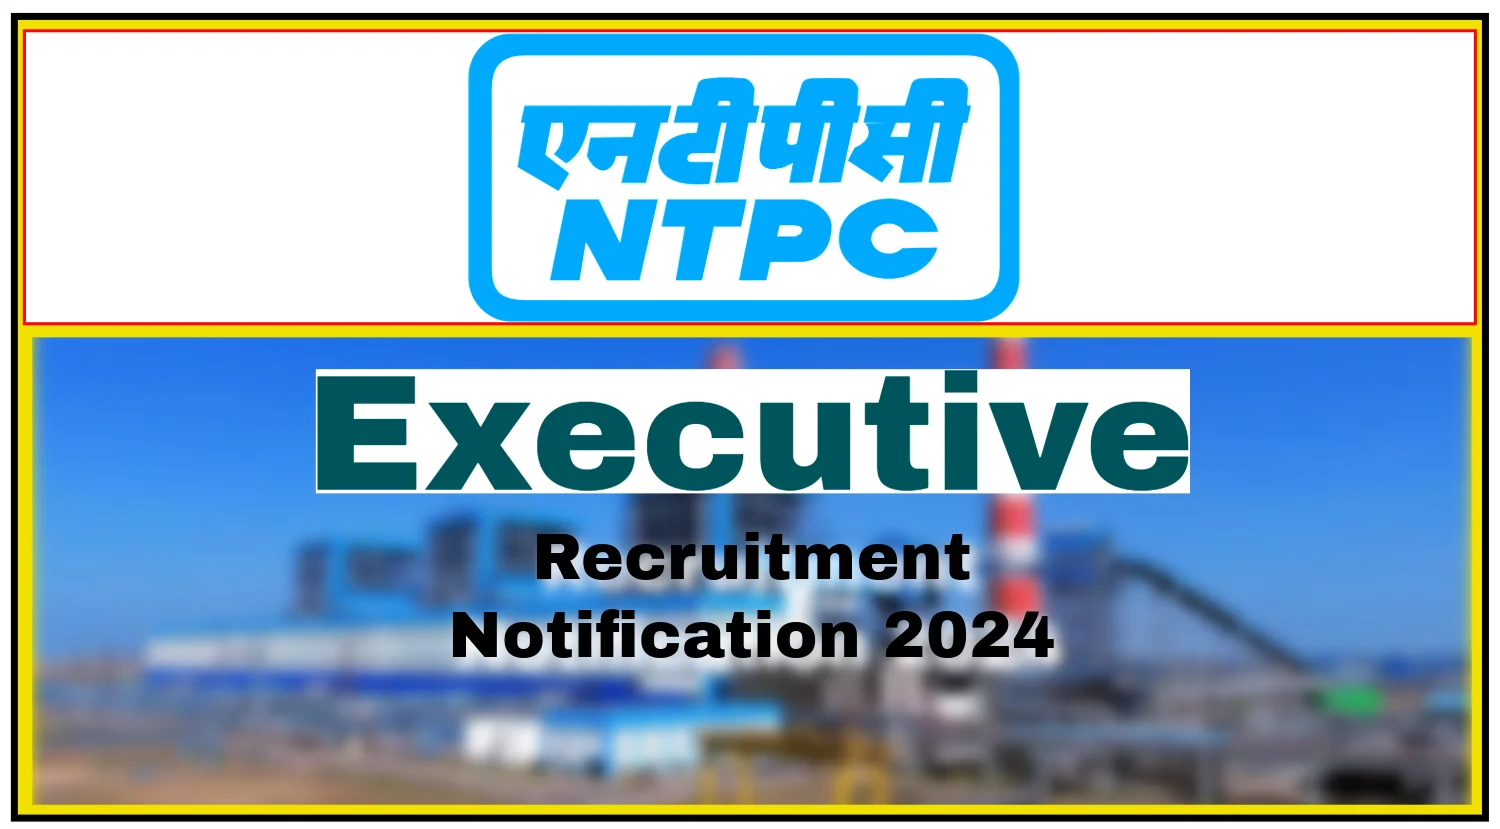 NTPC Limited Executive Recruitment Notification 2024